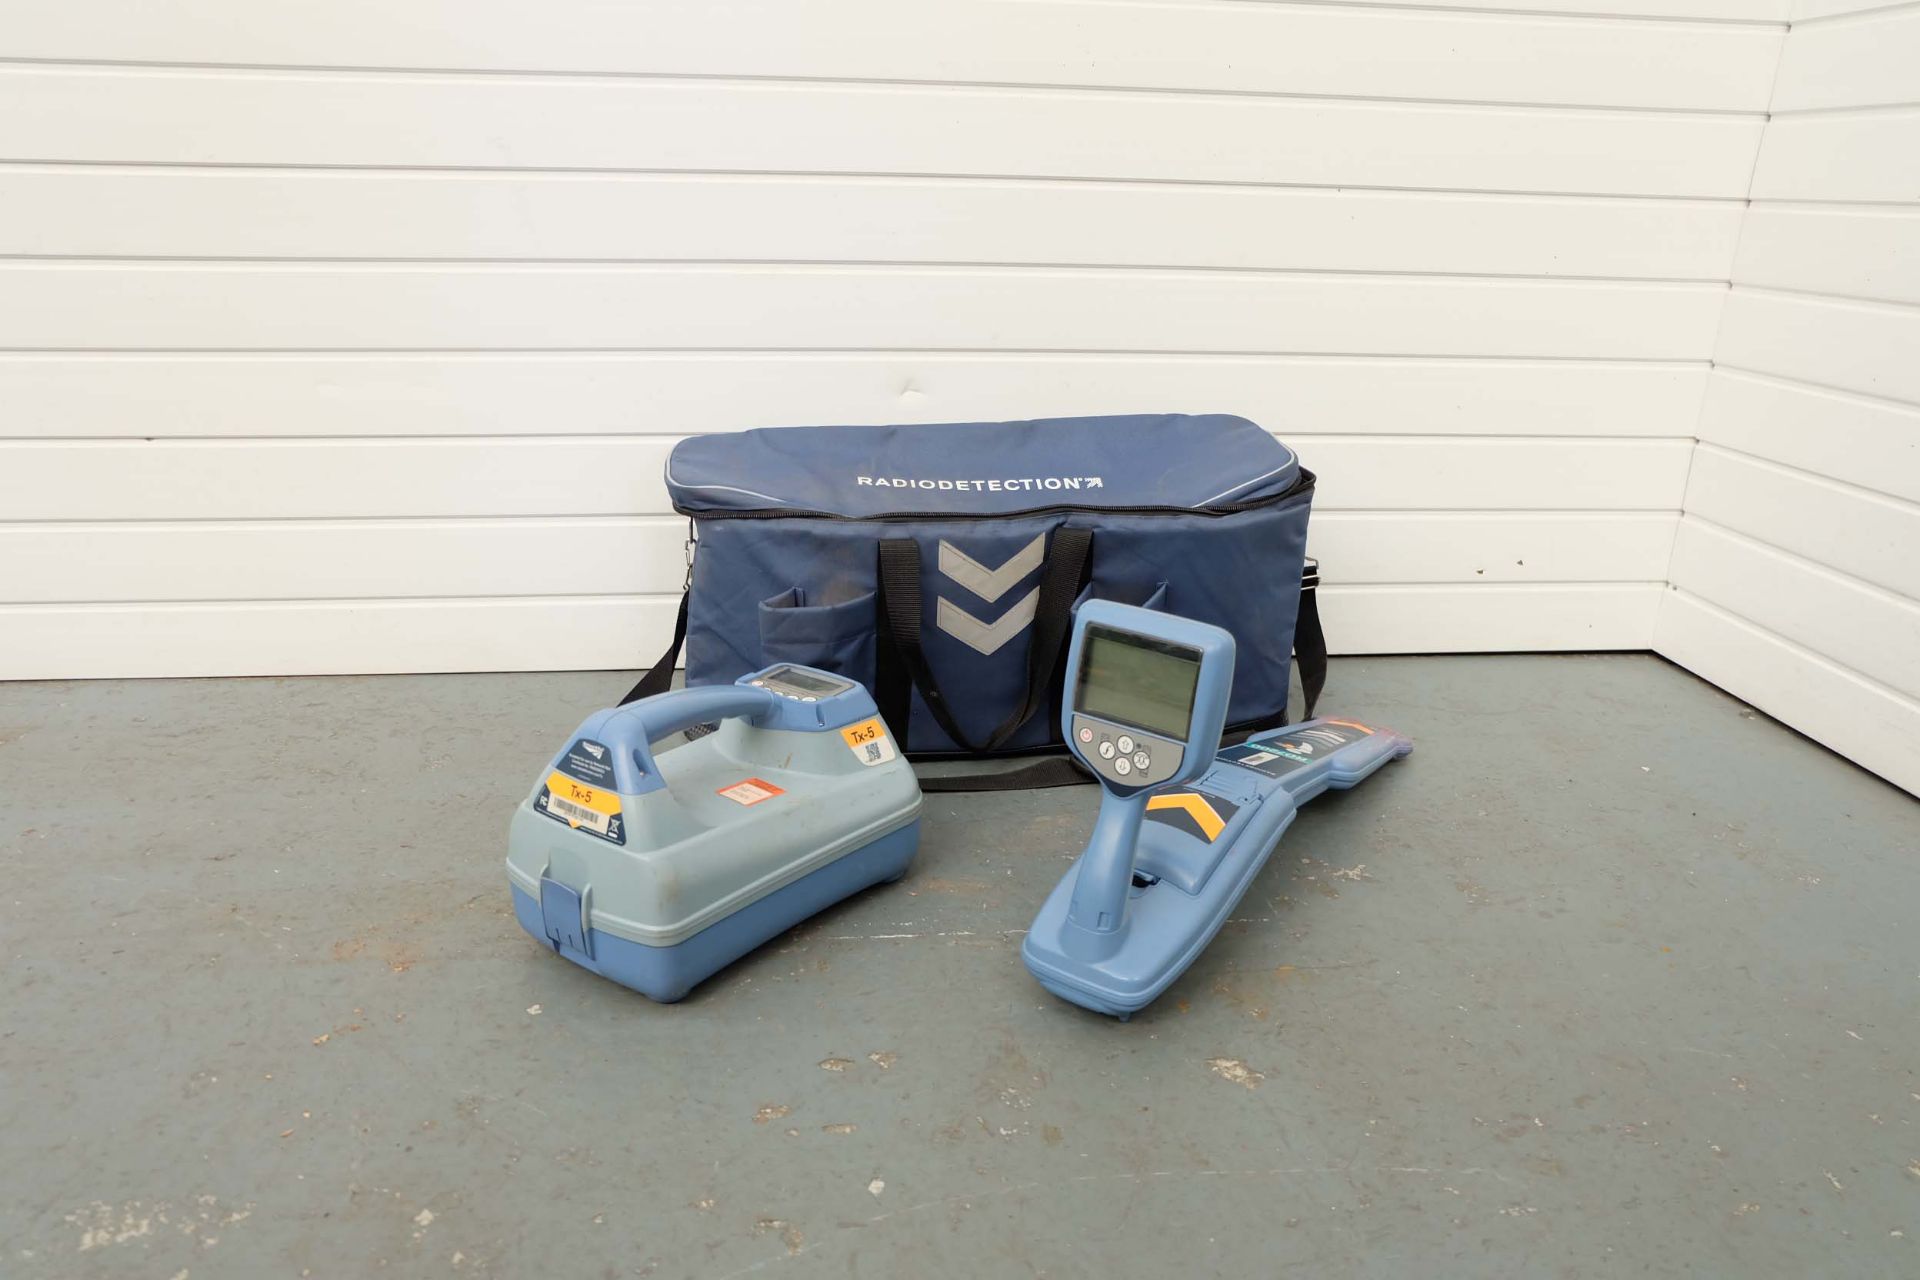 Radiodetection Model RD7200 Multifunction Precision Cable & Pipe Locator.